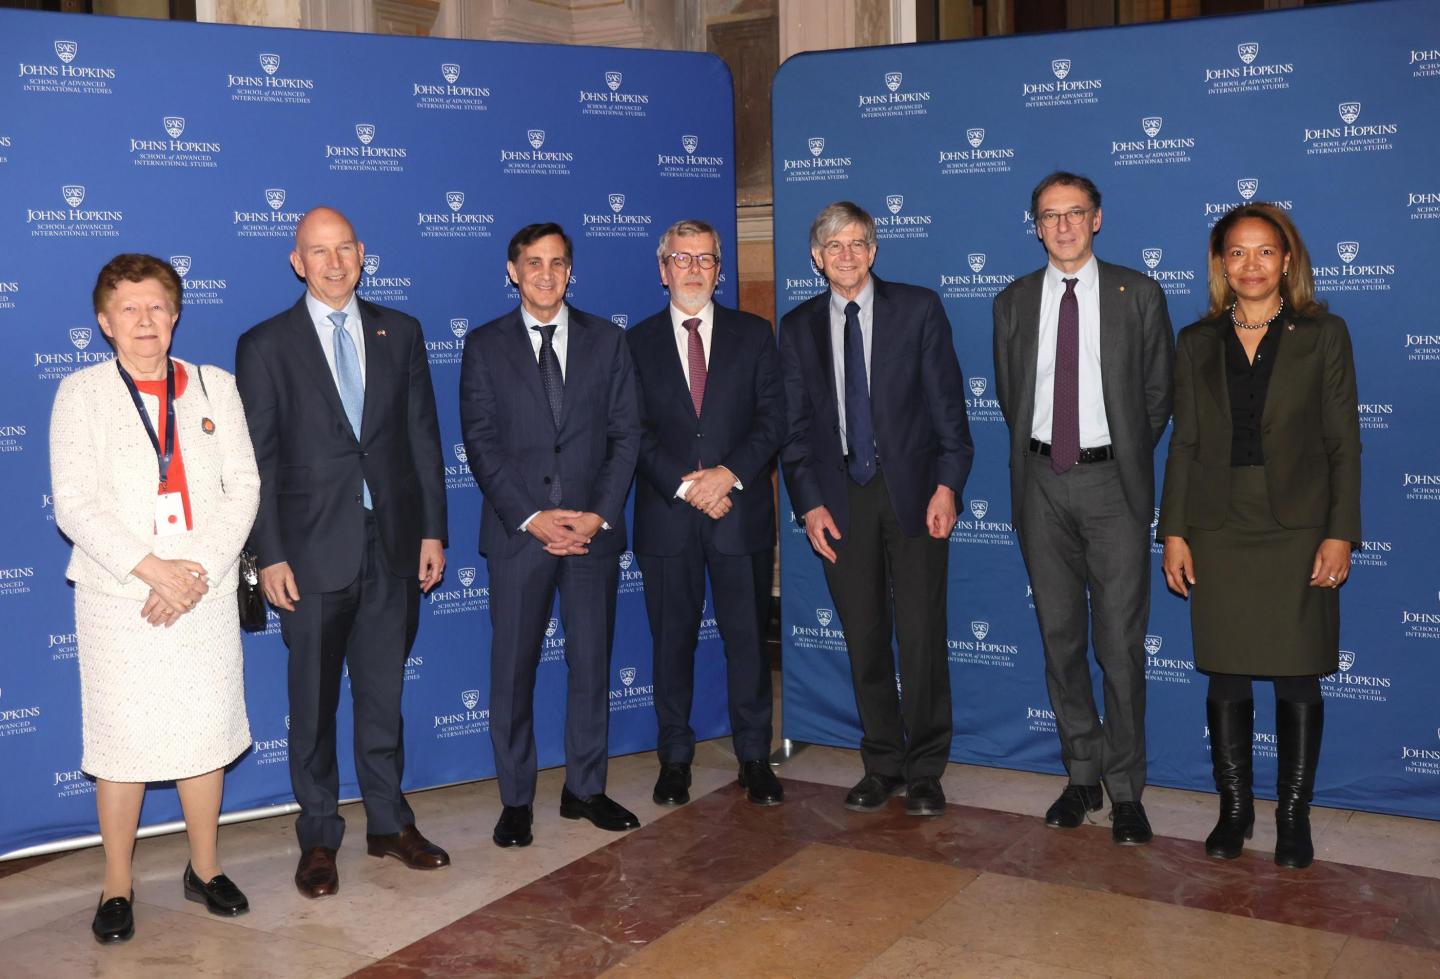 Group of speakers at the SAIS Europe rector installation ceremony